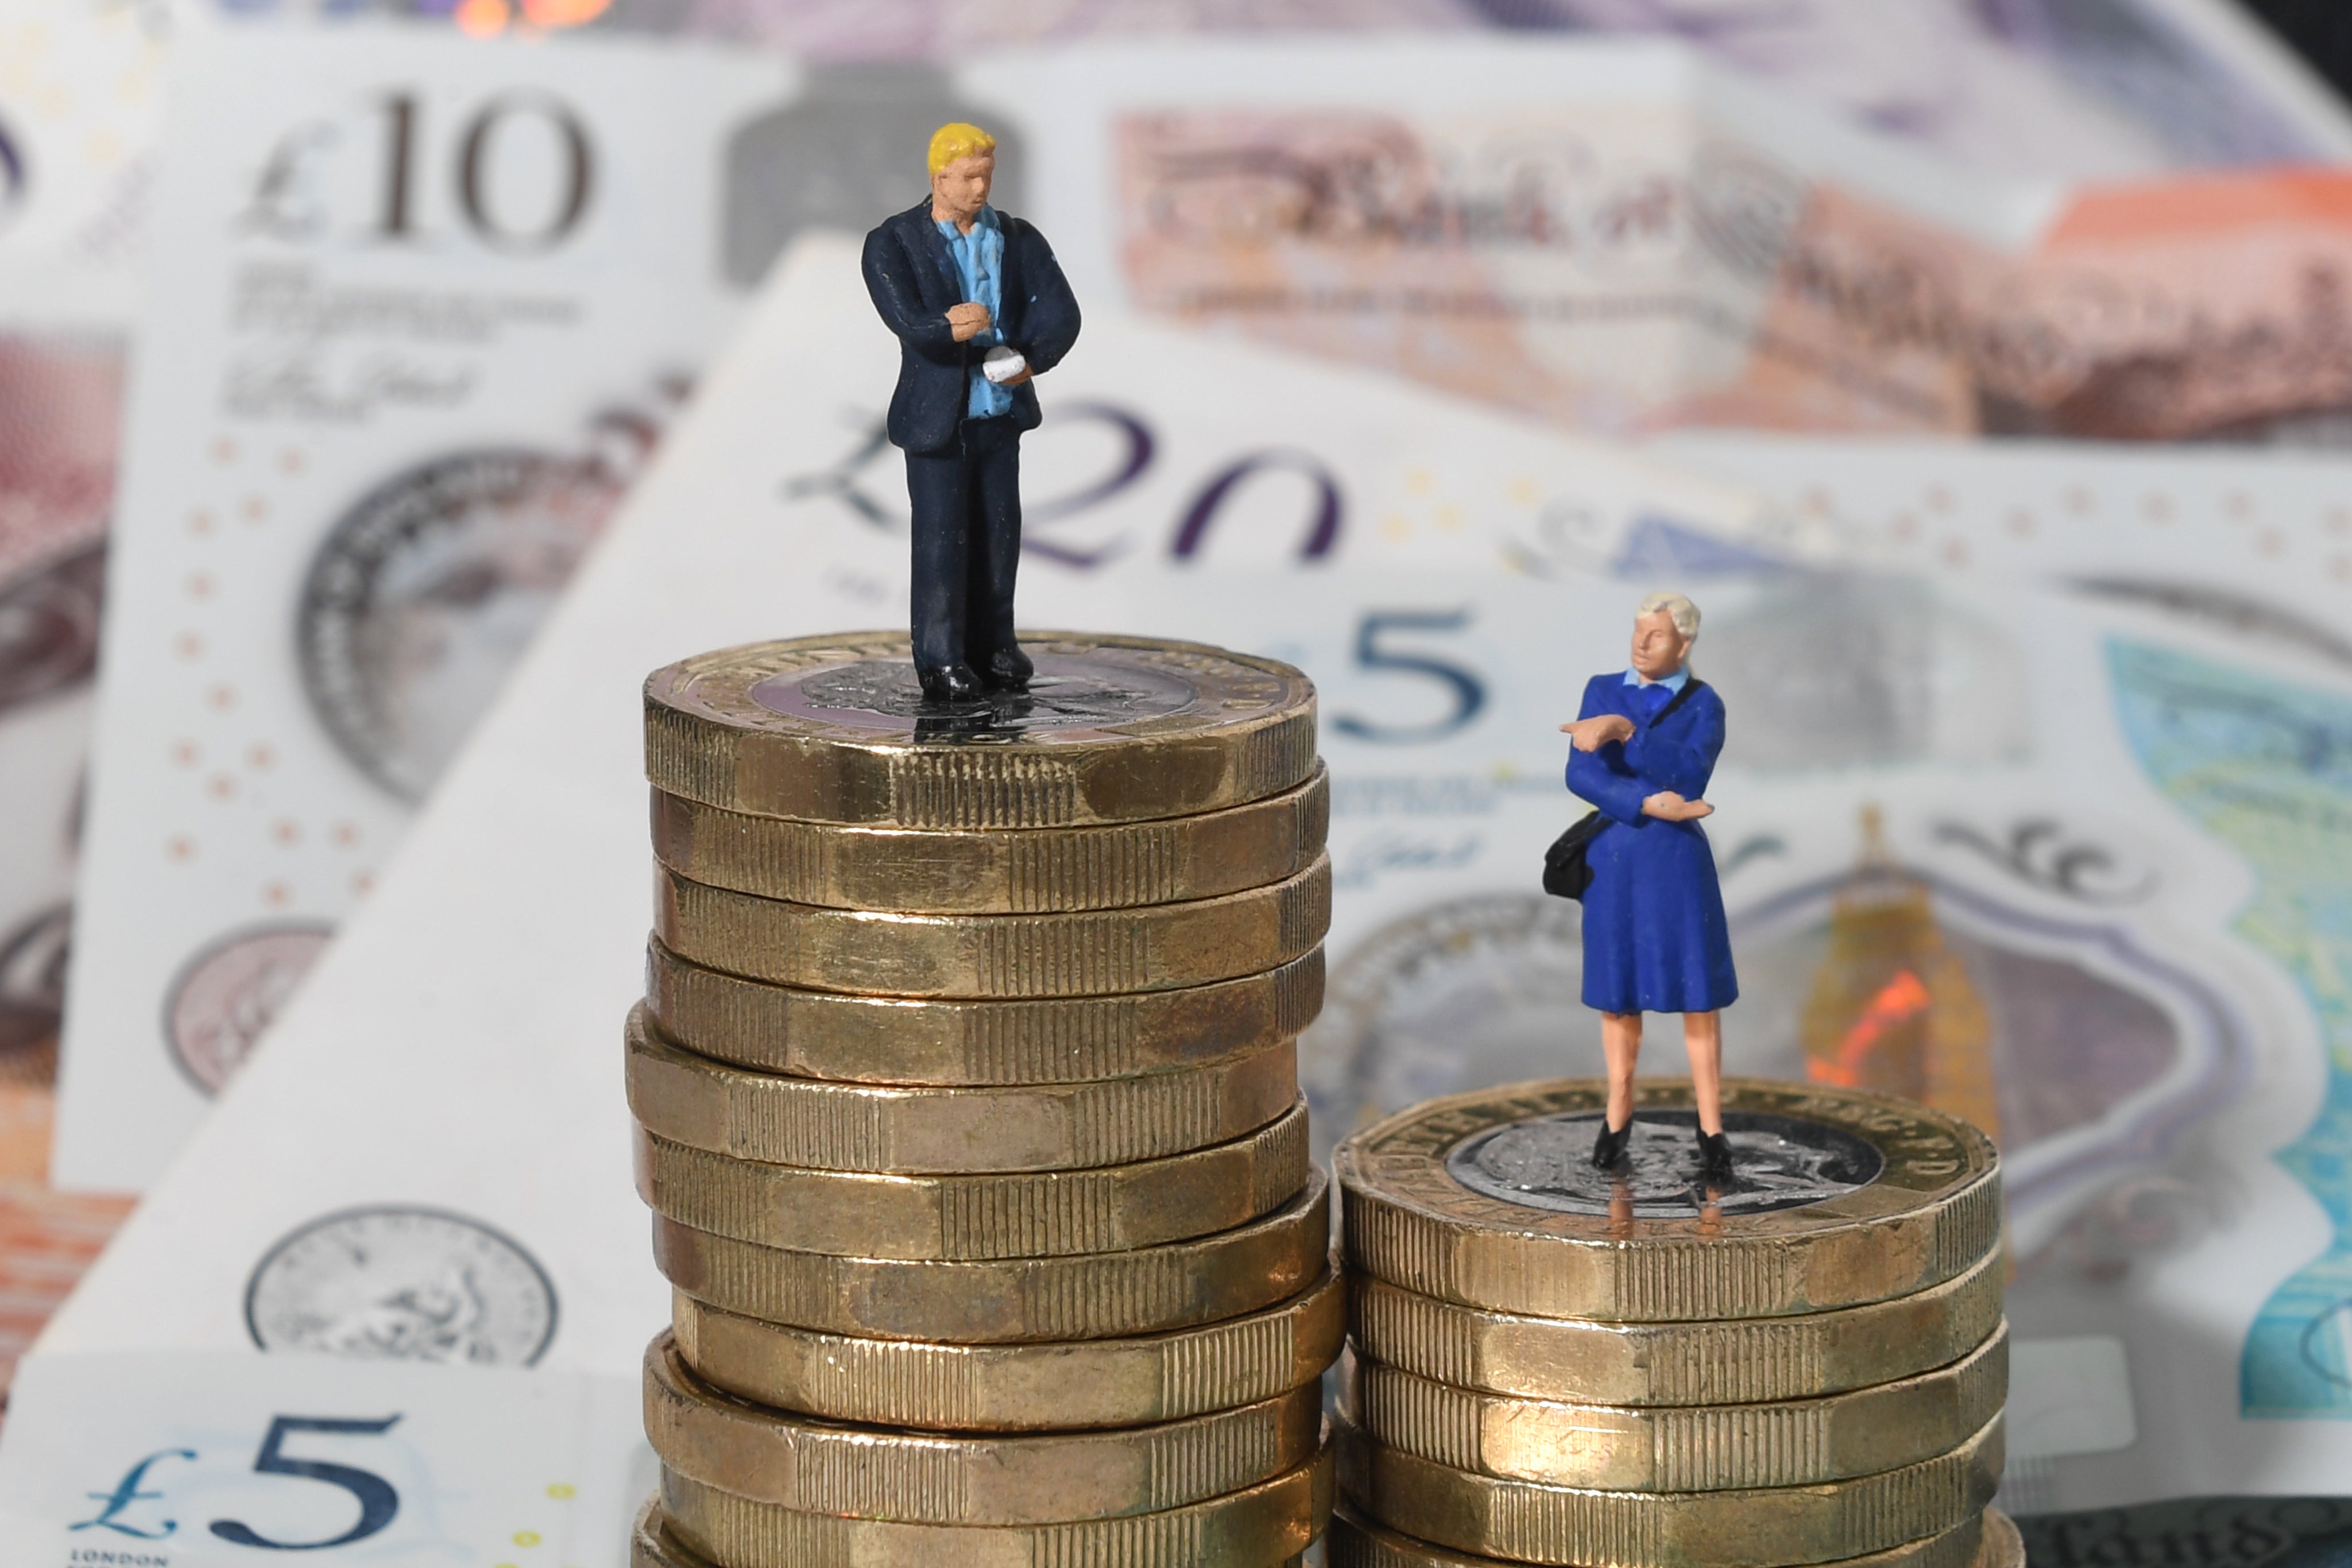 Gender pay gaps were found to be even starker in certain areas of the UK, resulting in women having to work for even longer for free each year